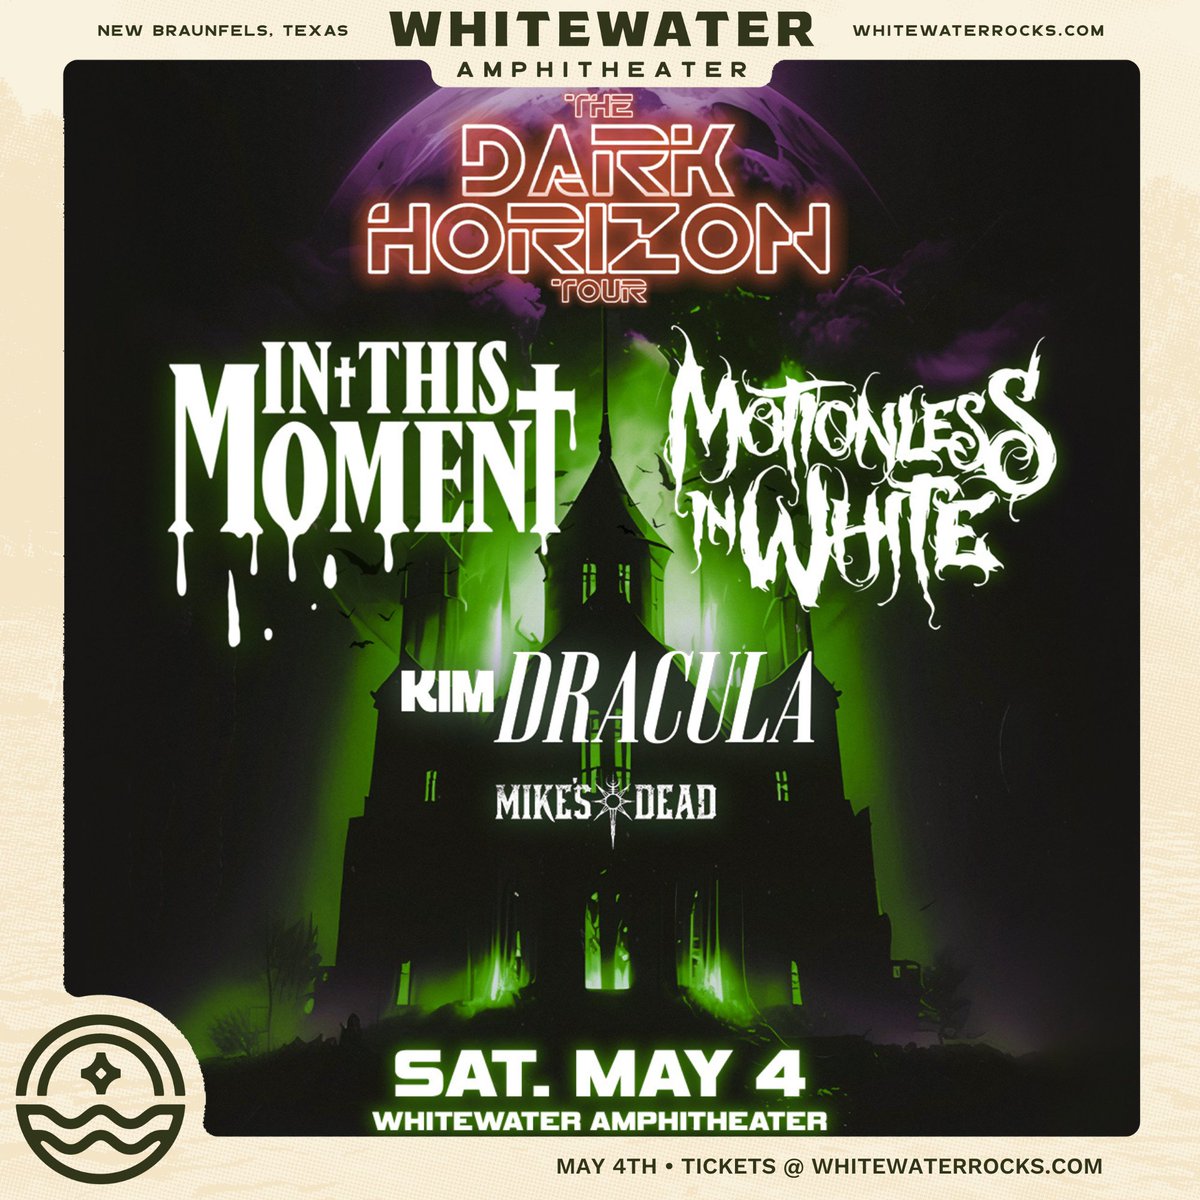 We can't wait for @officialitm & @miwband with @kimdrac and @mikes_dead next weekend! Who's coming?! 🤘 Get your tix: bit.ly/ITMMIW24 #inthismoment #motionlessinwhite #nbtx #ontheriverunderthestars